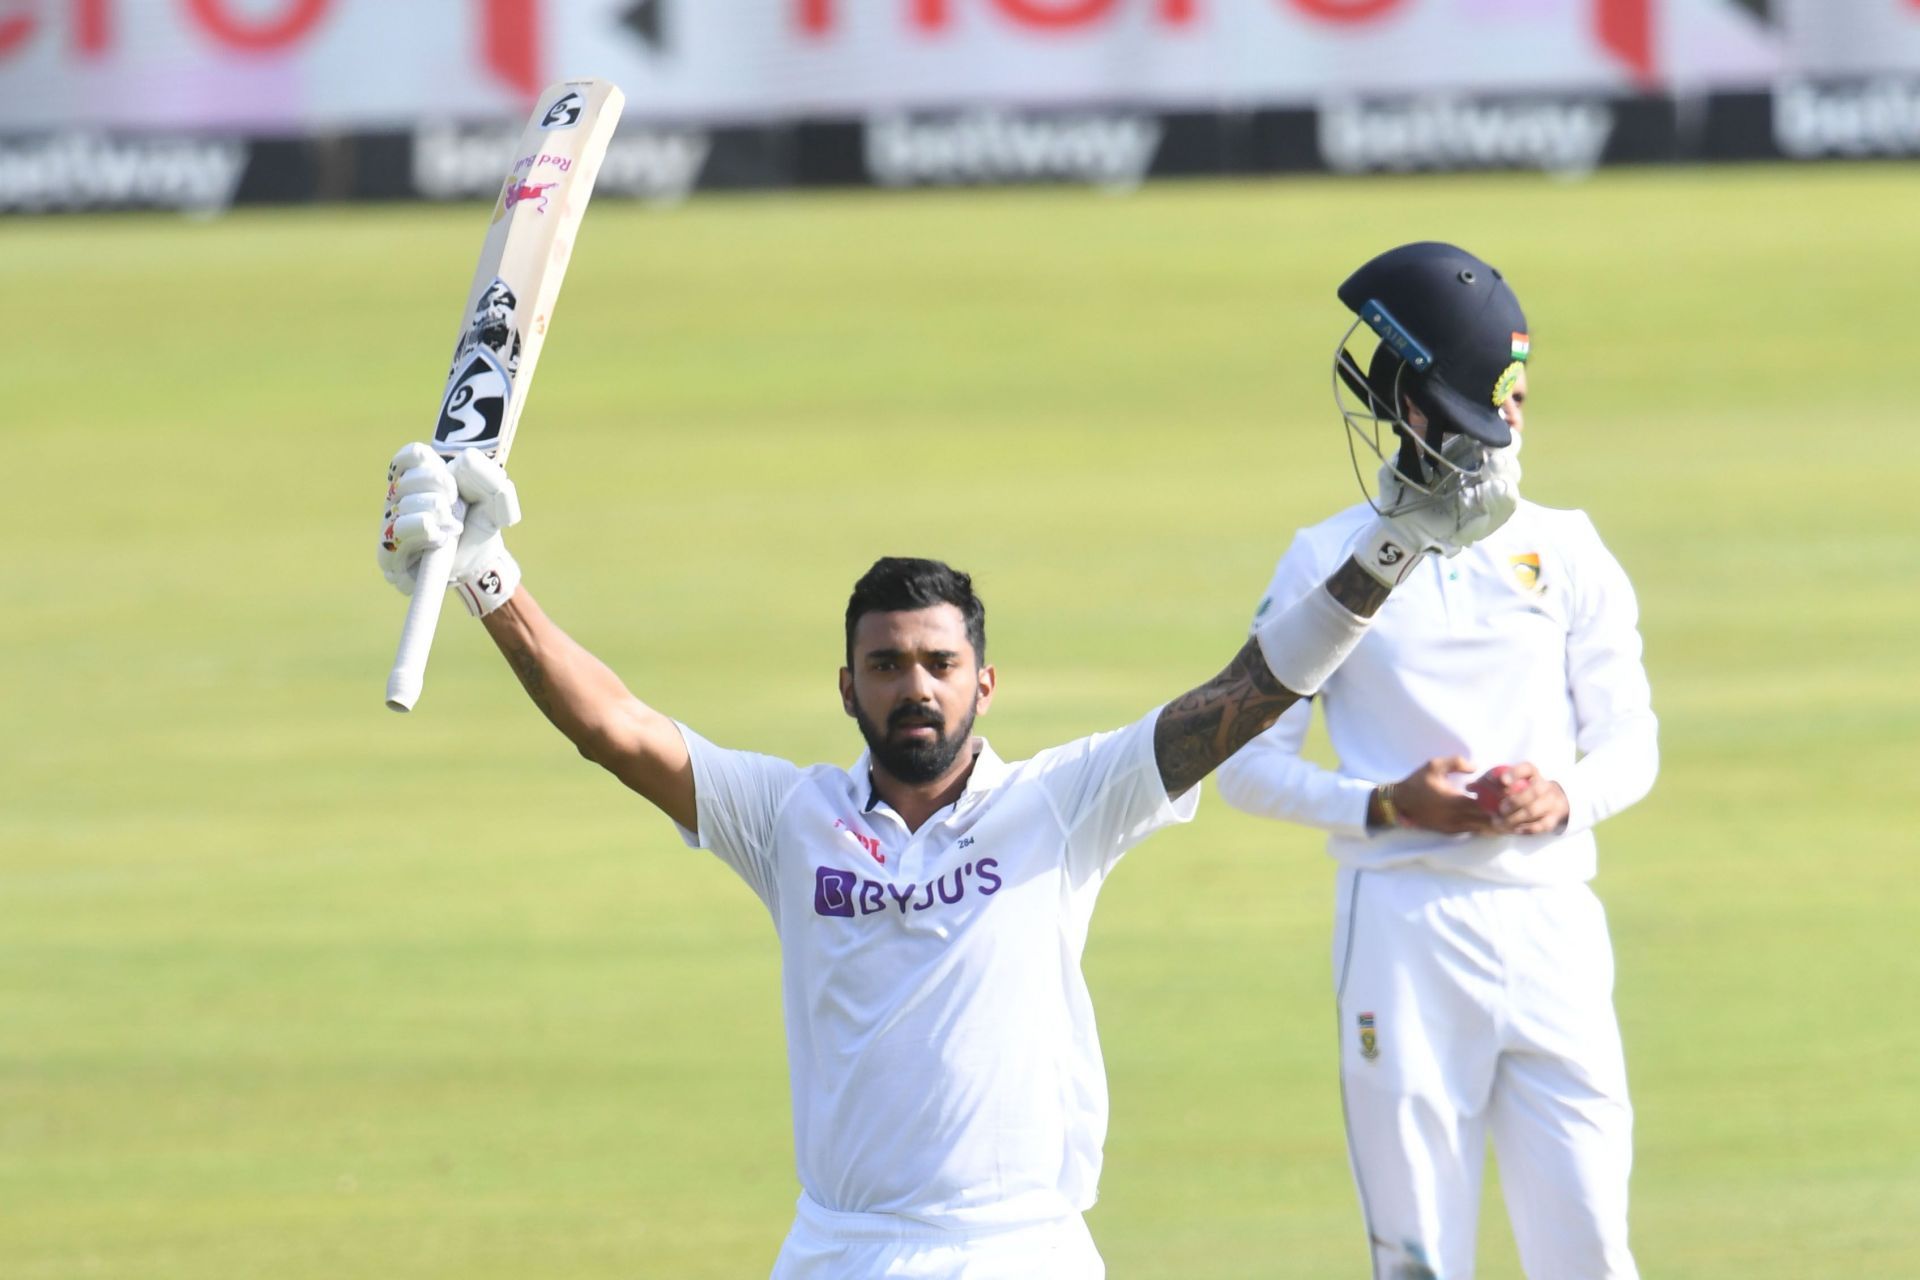 KL Rahul celebrates his hundred on Day 1 of the Boxing Day Test. Pic: Getty Images